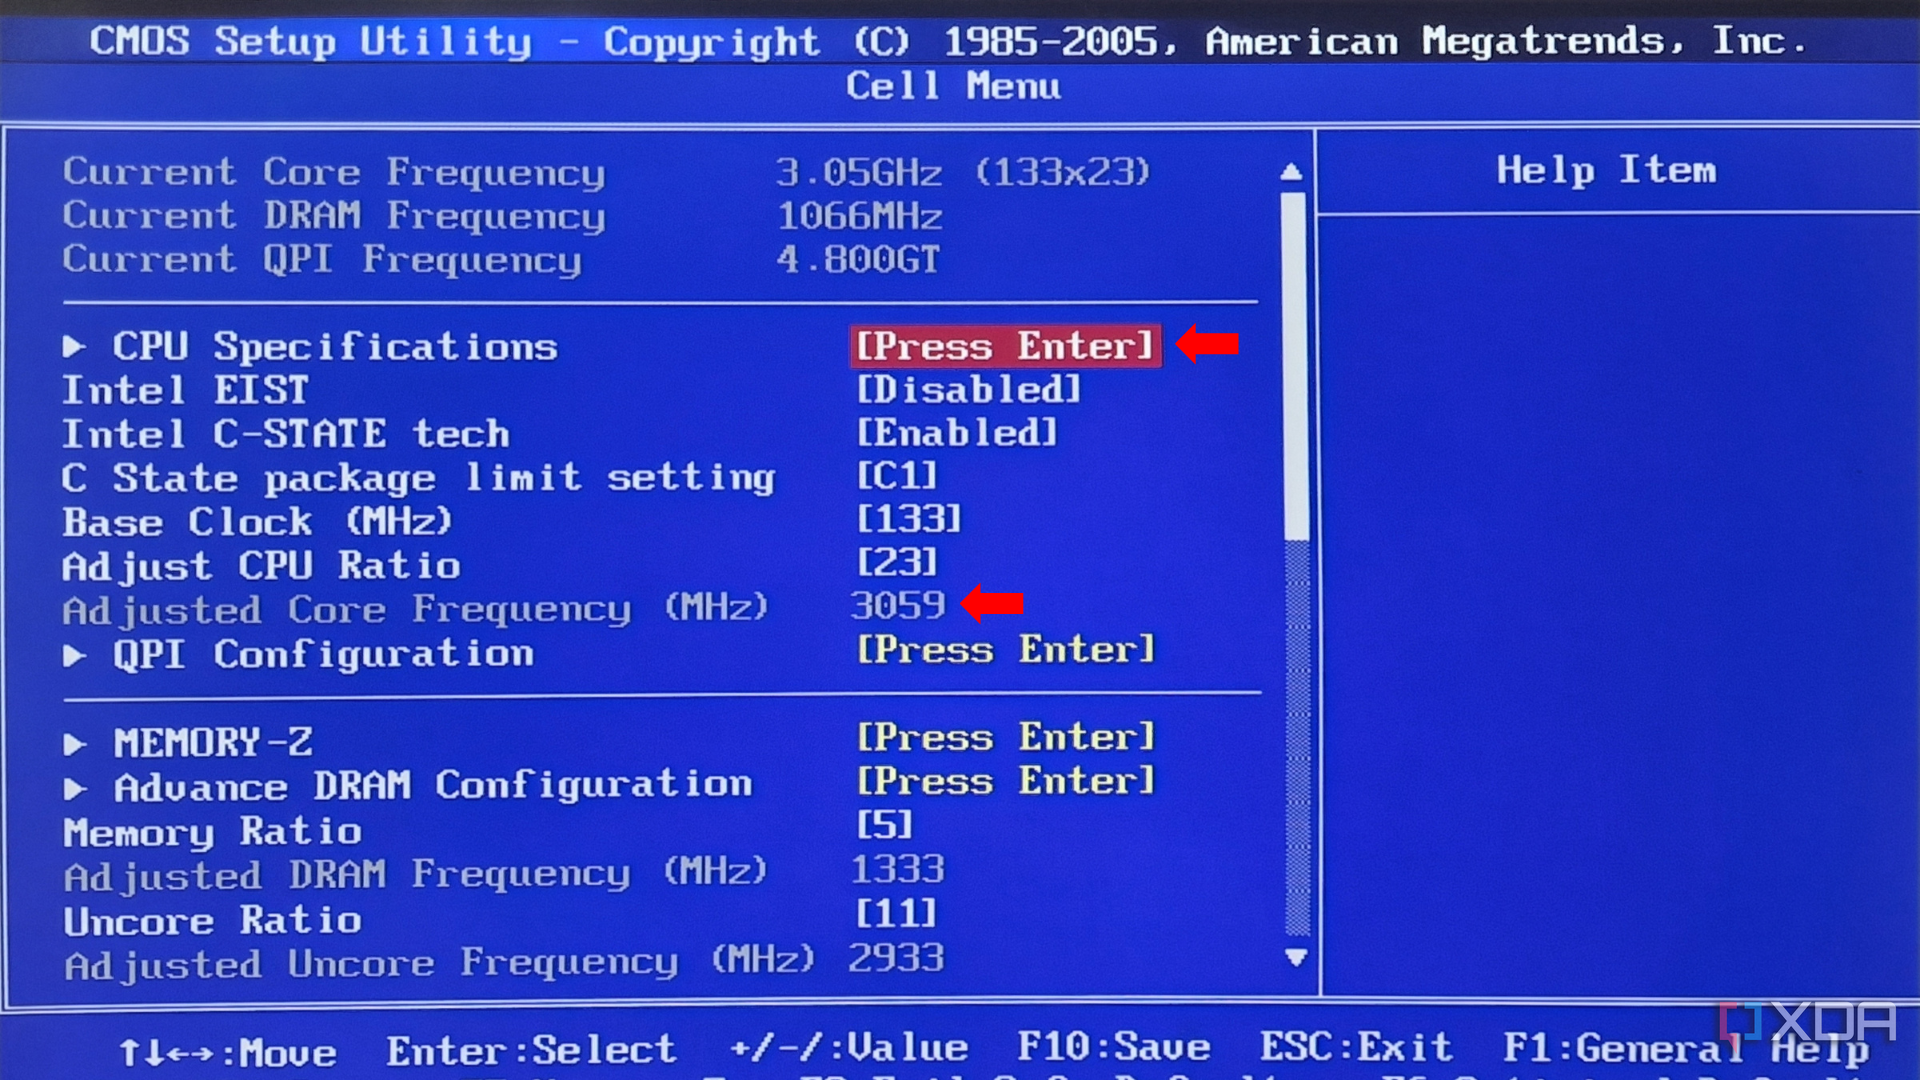 BIOS Cell Menu showing CPU specifications with an option to adjust the CPU ratio highlighted.